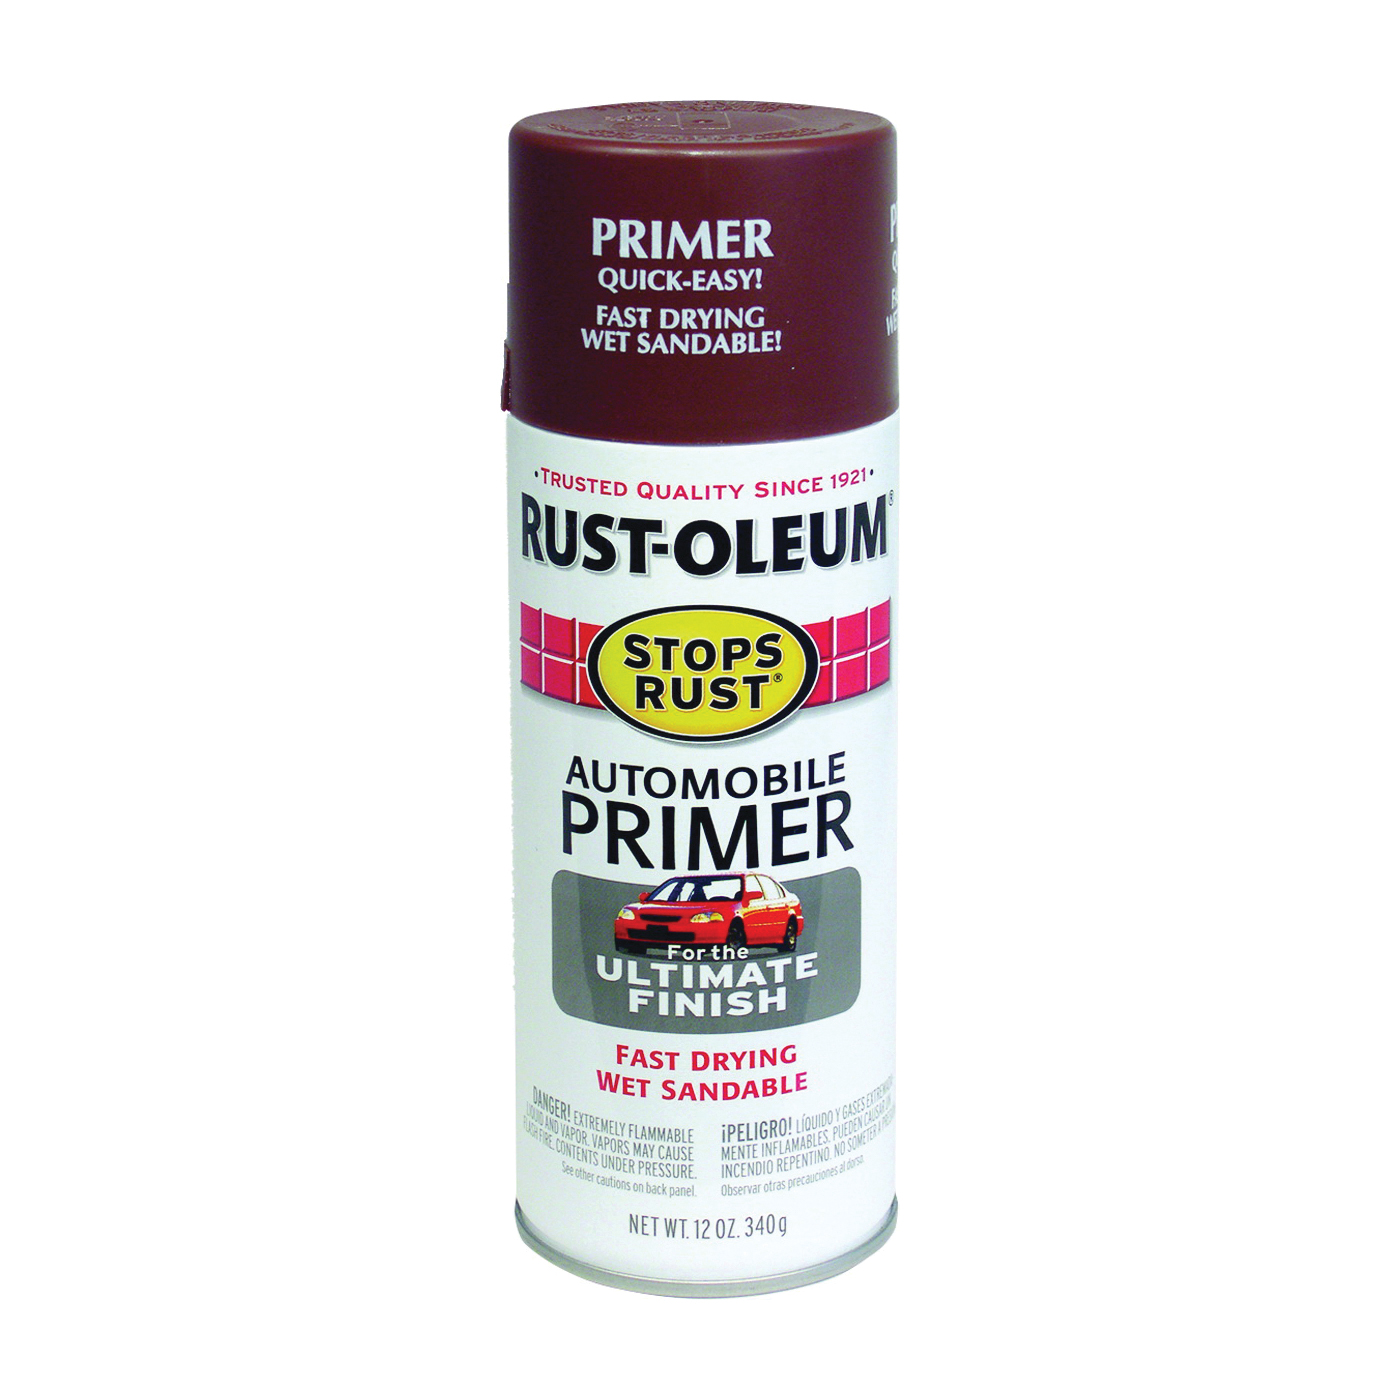 STOPS RUST 2067830 Automotive Primer Spray Paint, Red, 12 oz, Aerosol Can